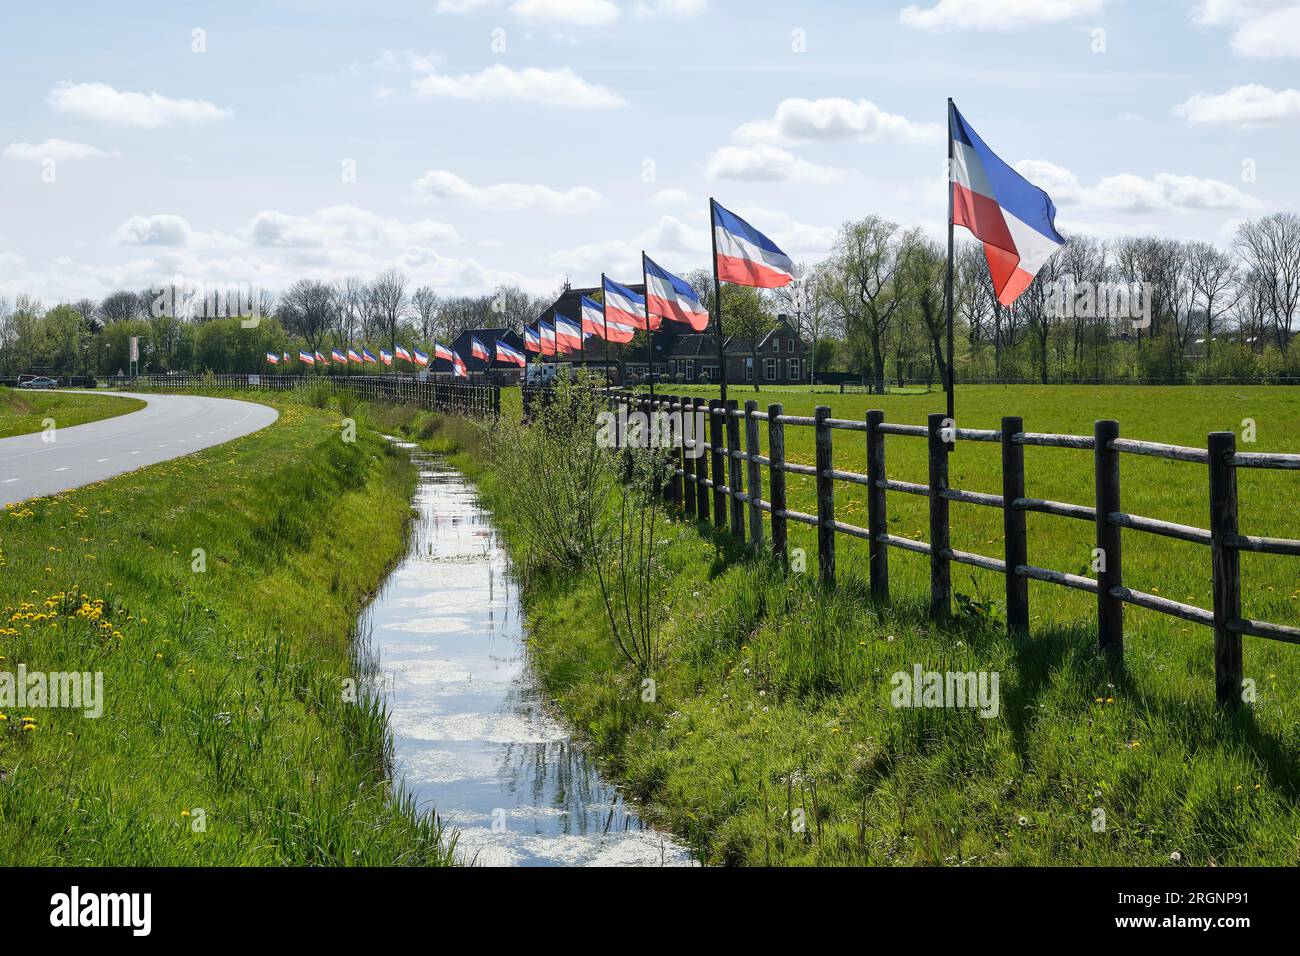 A row of dutch red white and blue upside down flags in The Netherlands. Protests against forced shrinking of livestock because of CO2 emissions. Stock Photo